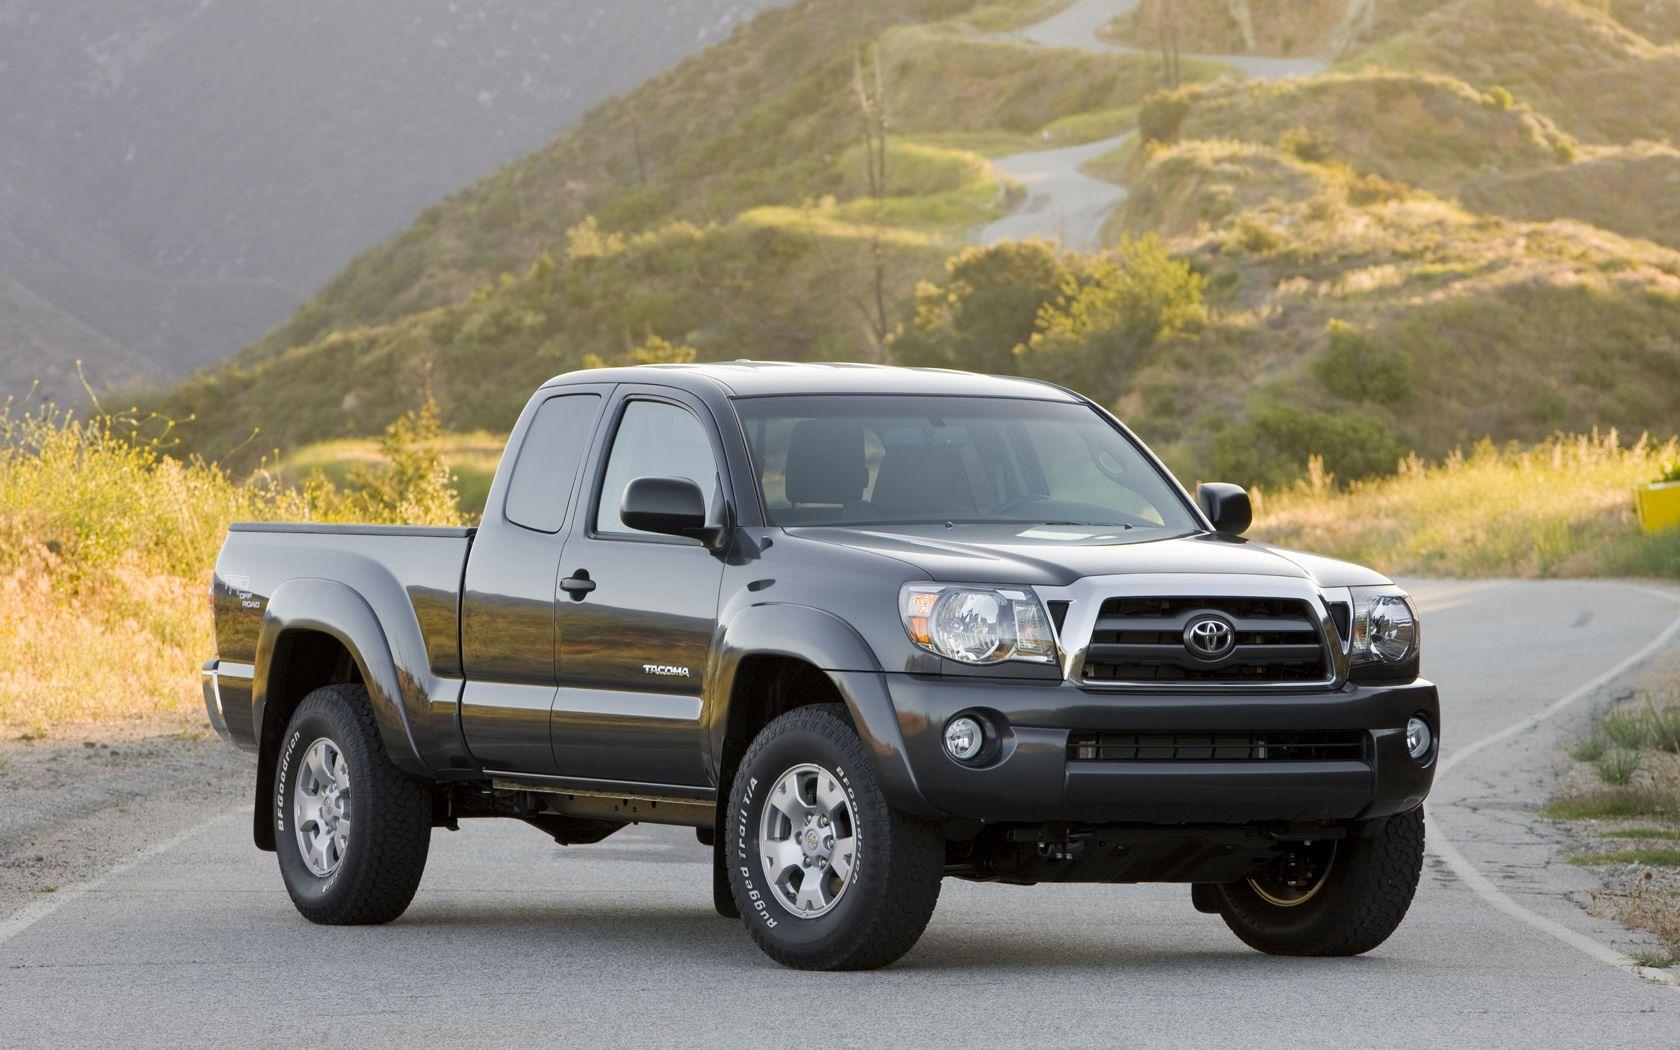 Toyota Tacoma Wallpapers - Wallpaper Cave